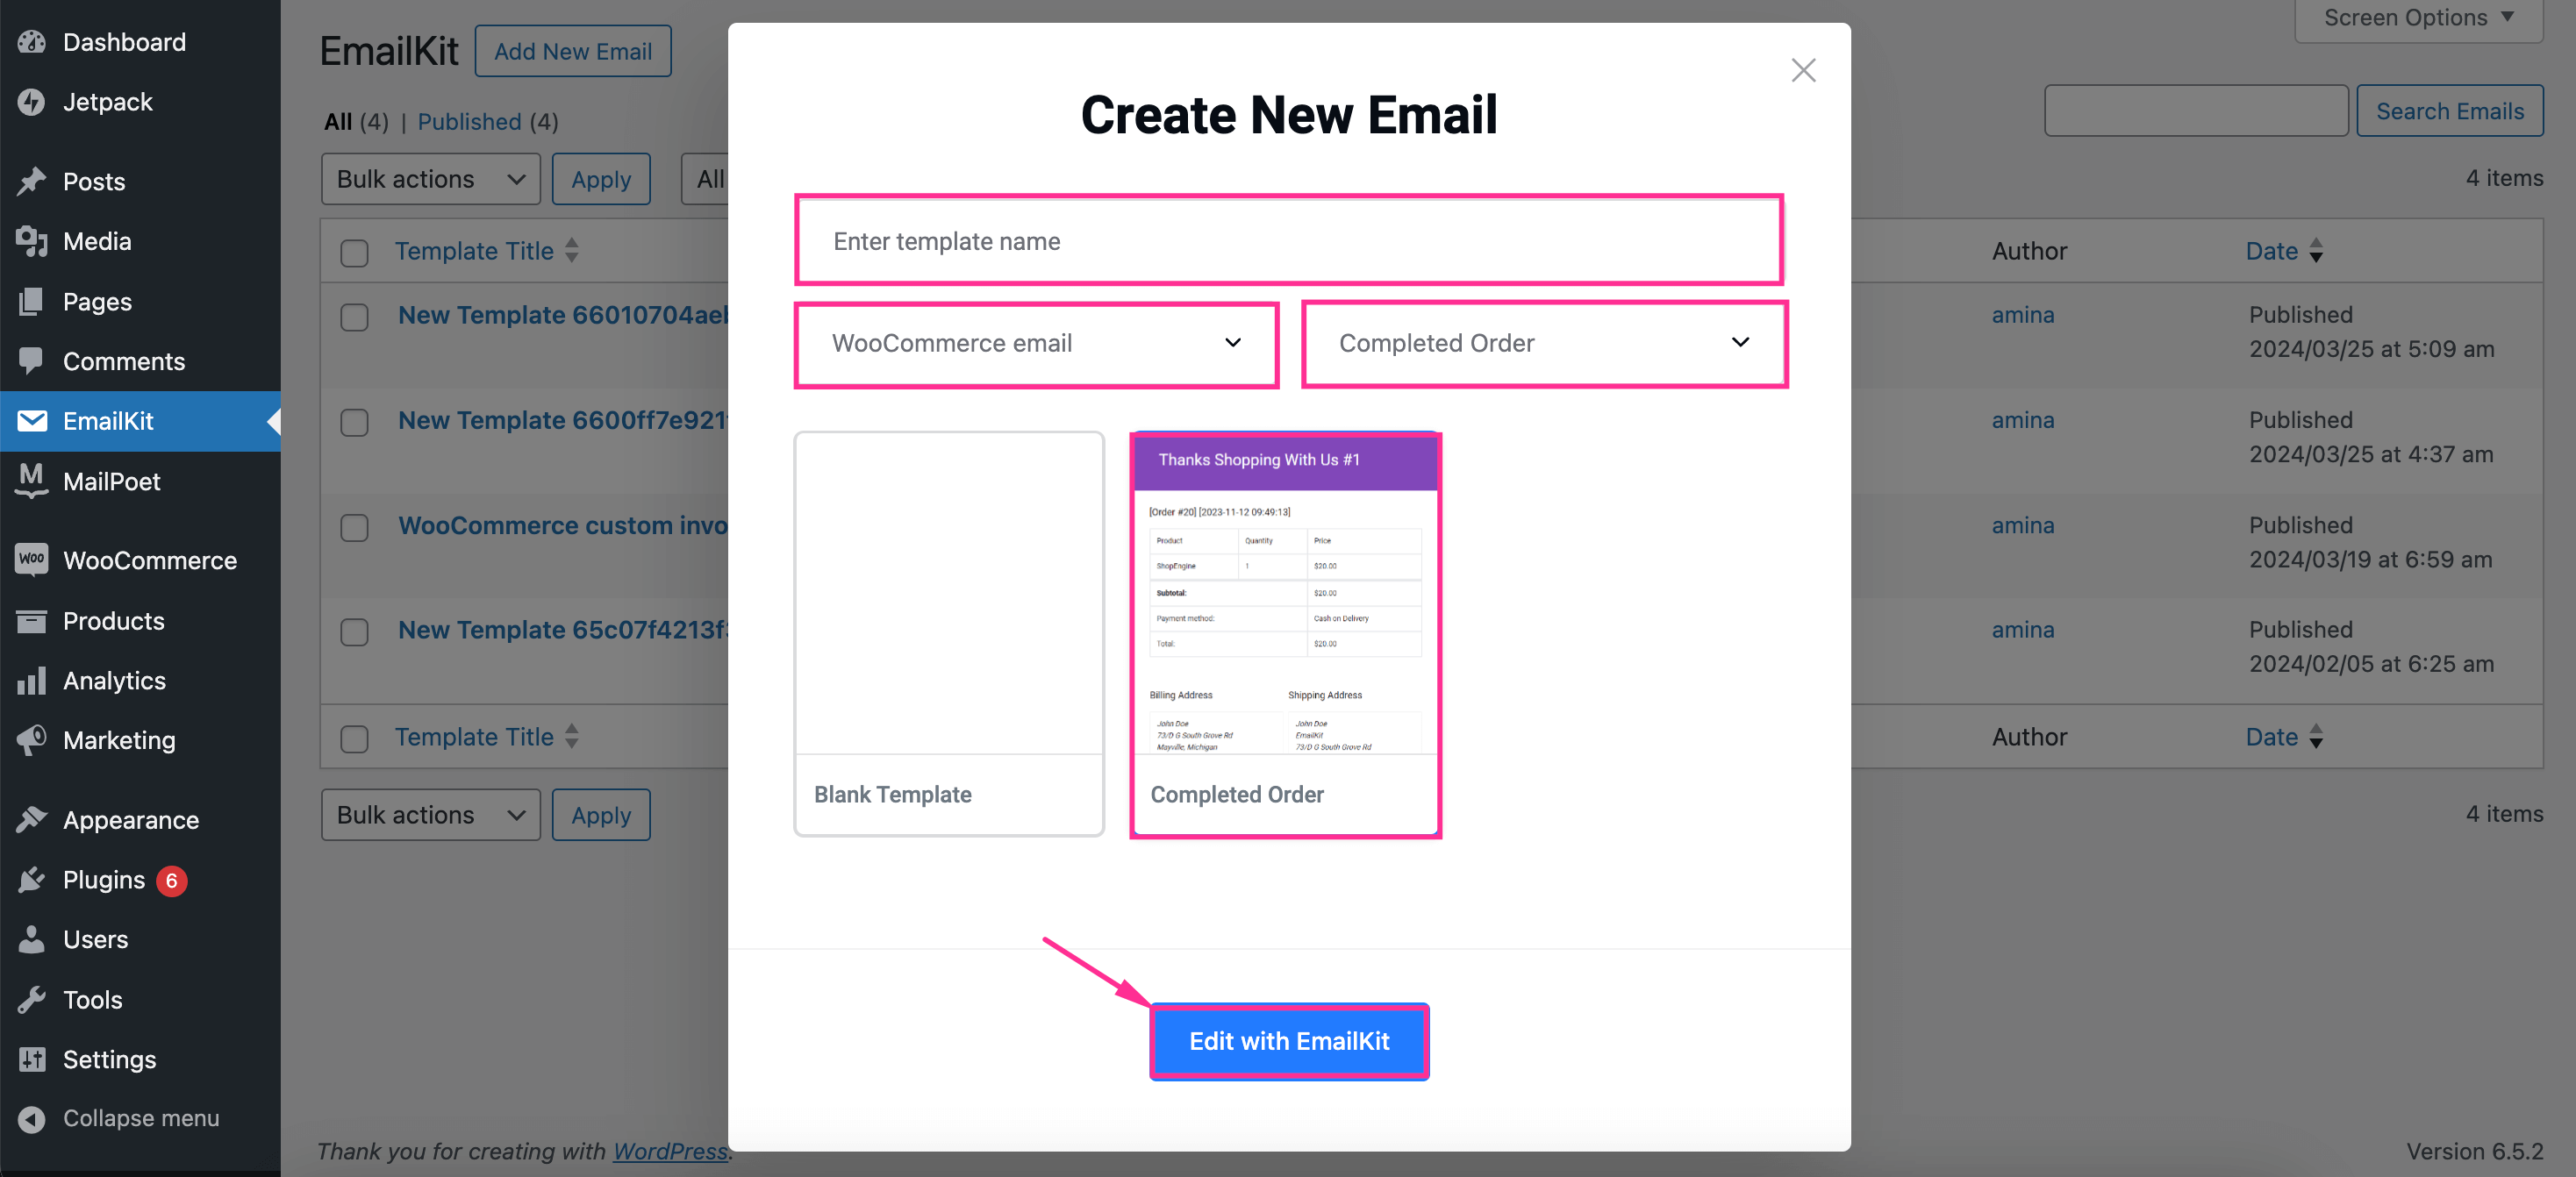 Prepare custom order confirmation email with built-in templates